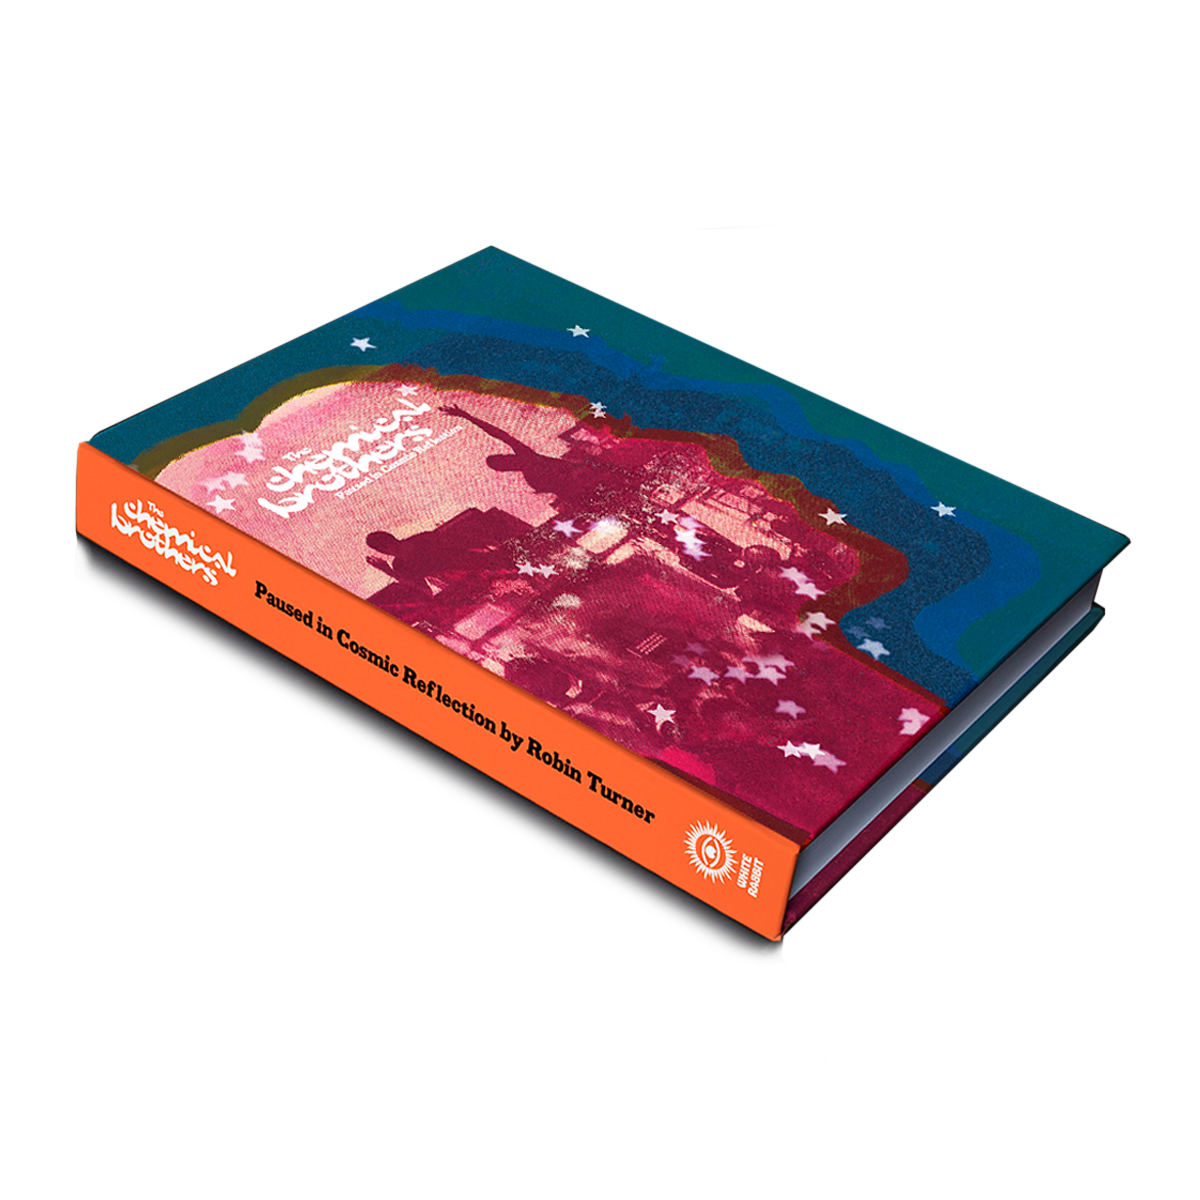 The Chemical Brothers - Paused in Cosmic Reflection: Hardback Book